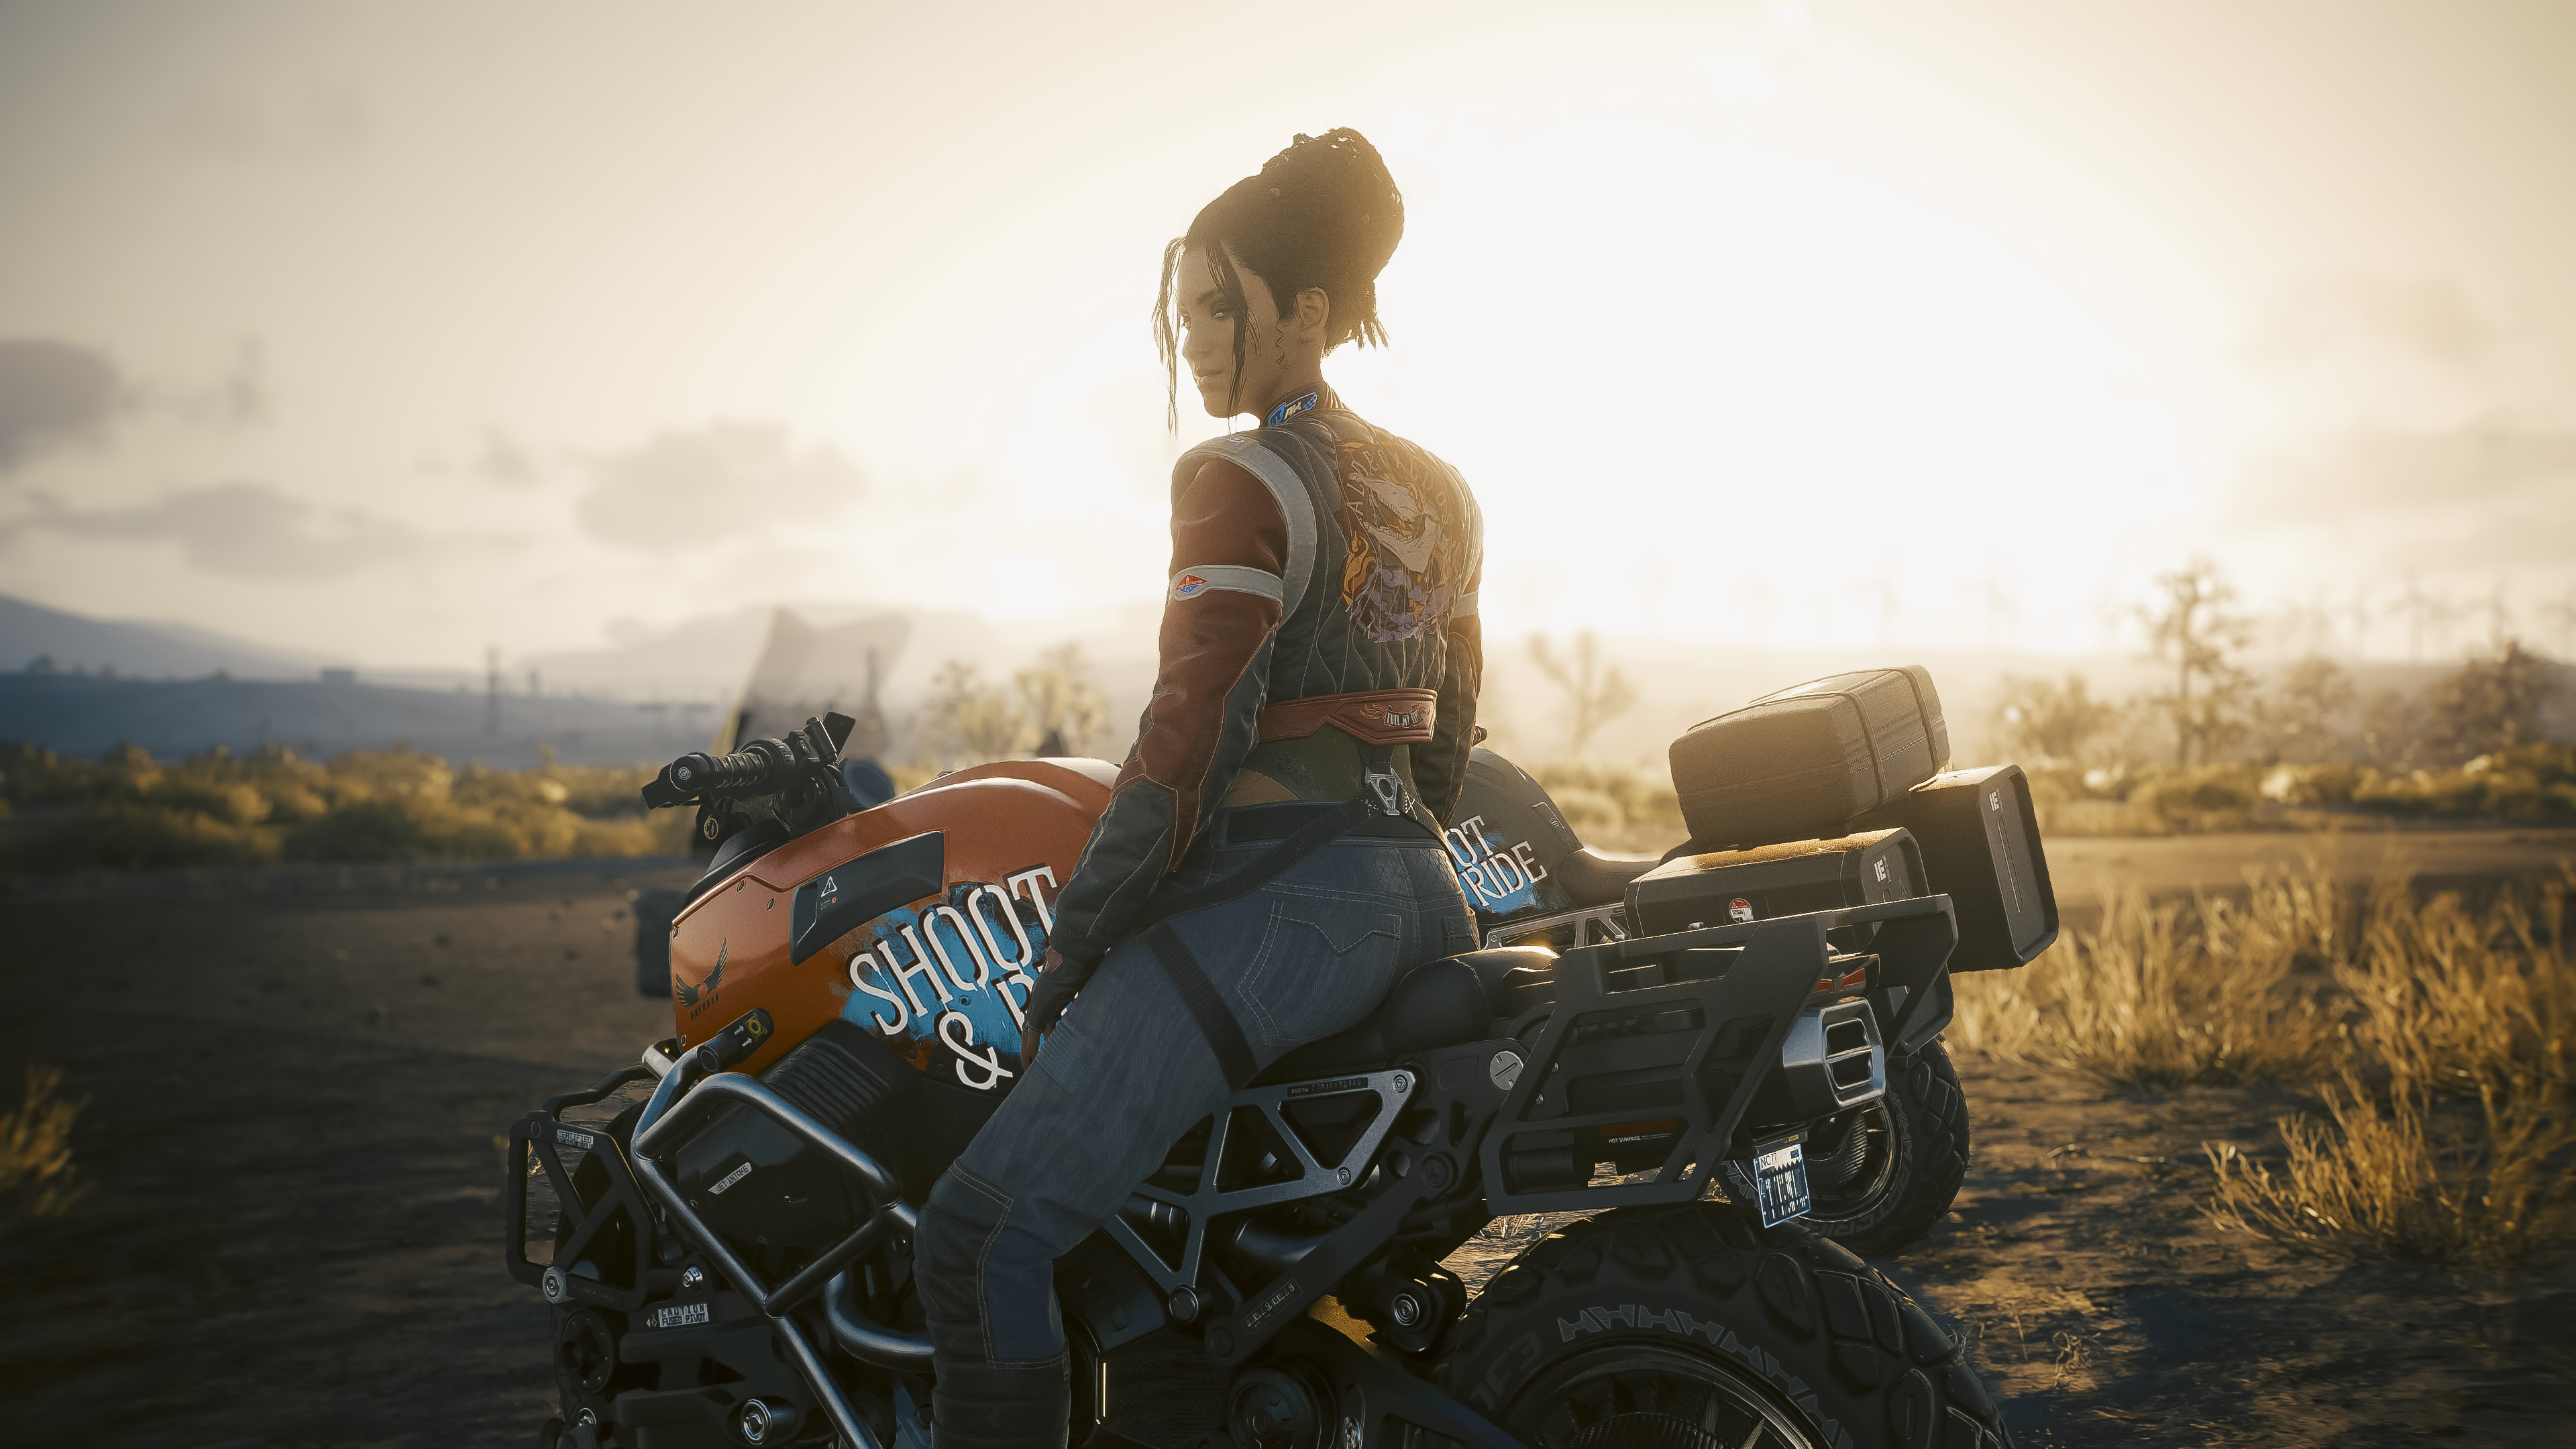 General 3840x2160 Cyberpunk 2077 video games video game art Panam Palmer video game characters motorcycle sunlight gloves jacket jeans short hair screen shot